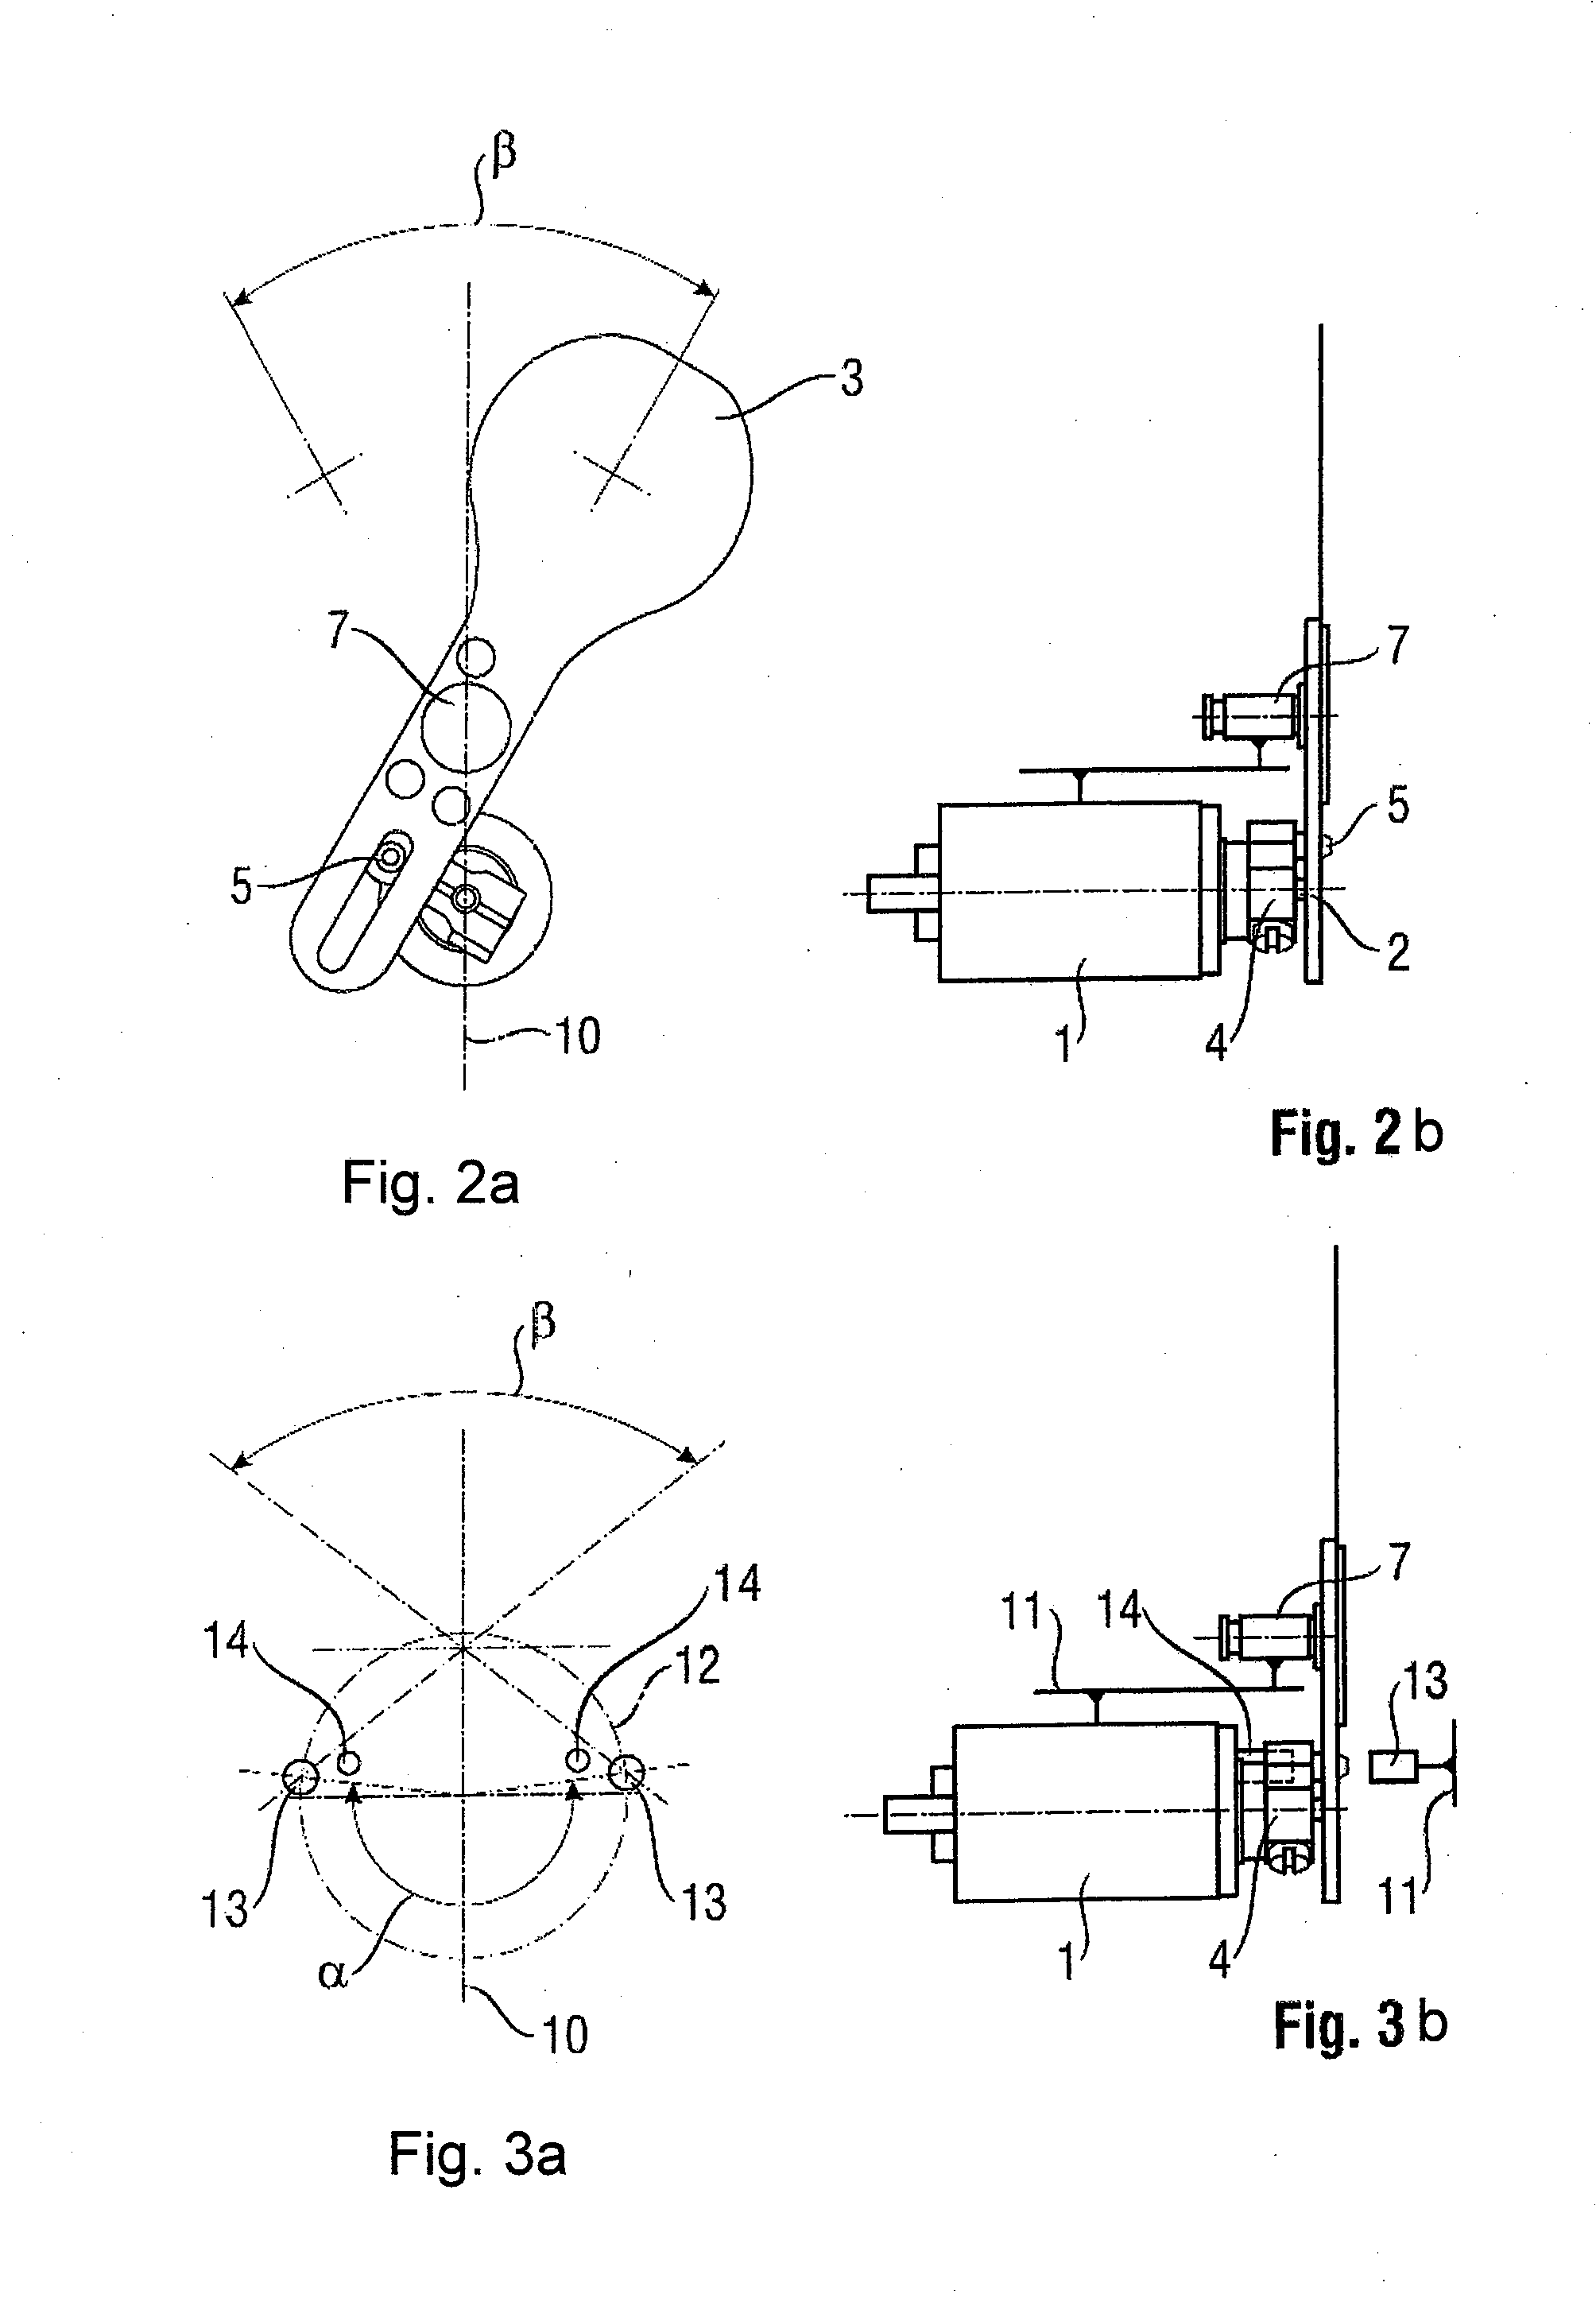 Thermal imaging camera with a fast electromechanical shutter device